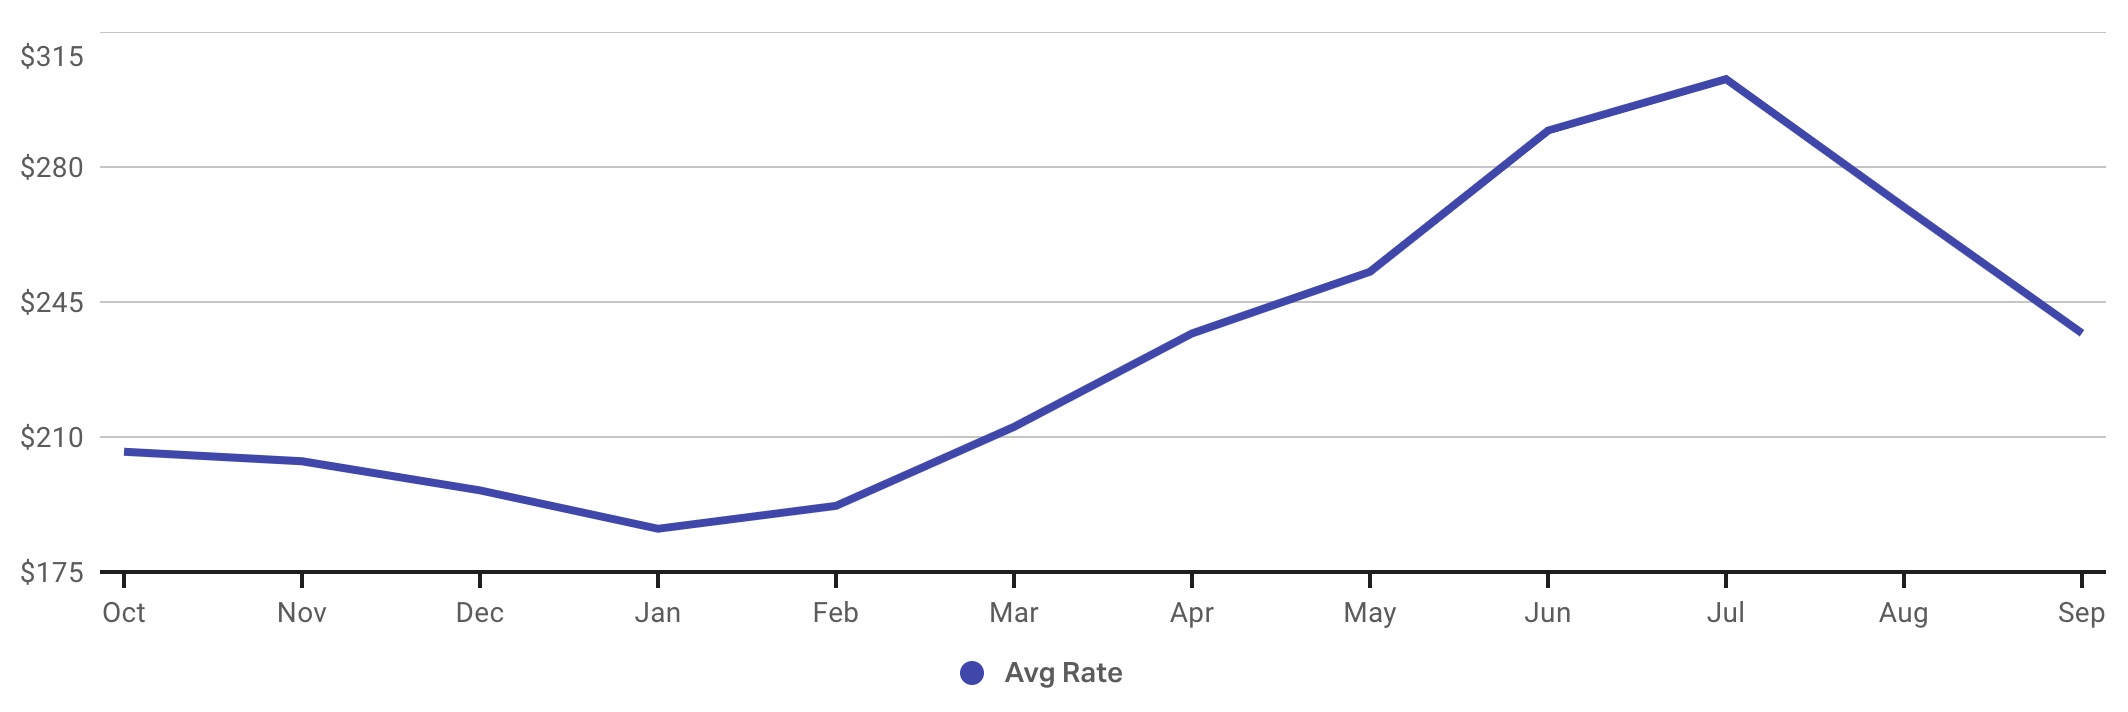 Chart showing historical average daily rate data for vacation rentals in Myrtle Beach.